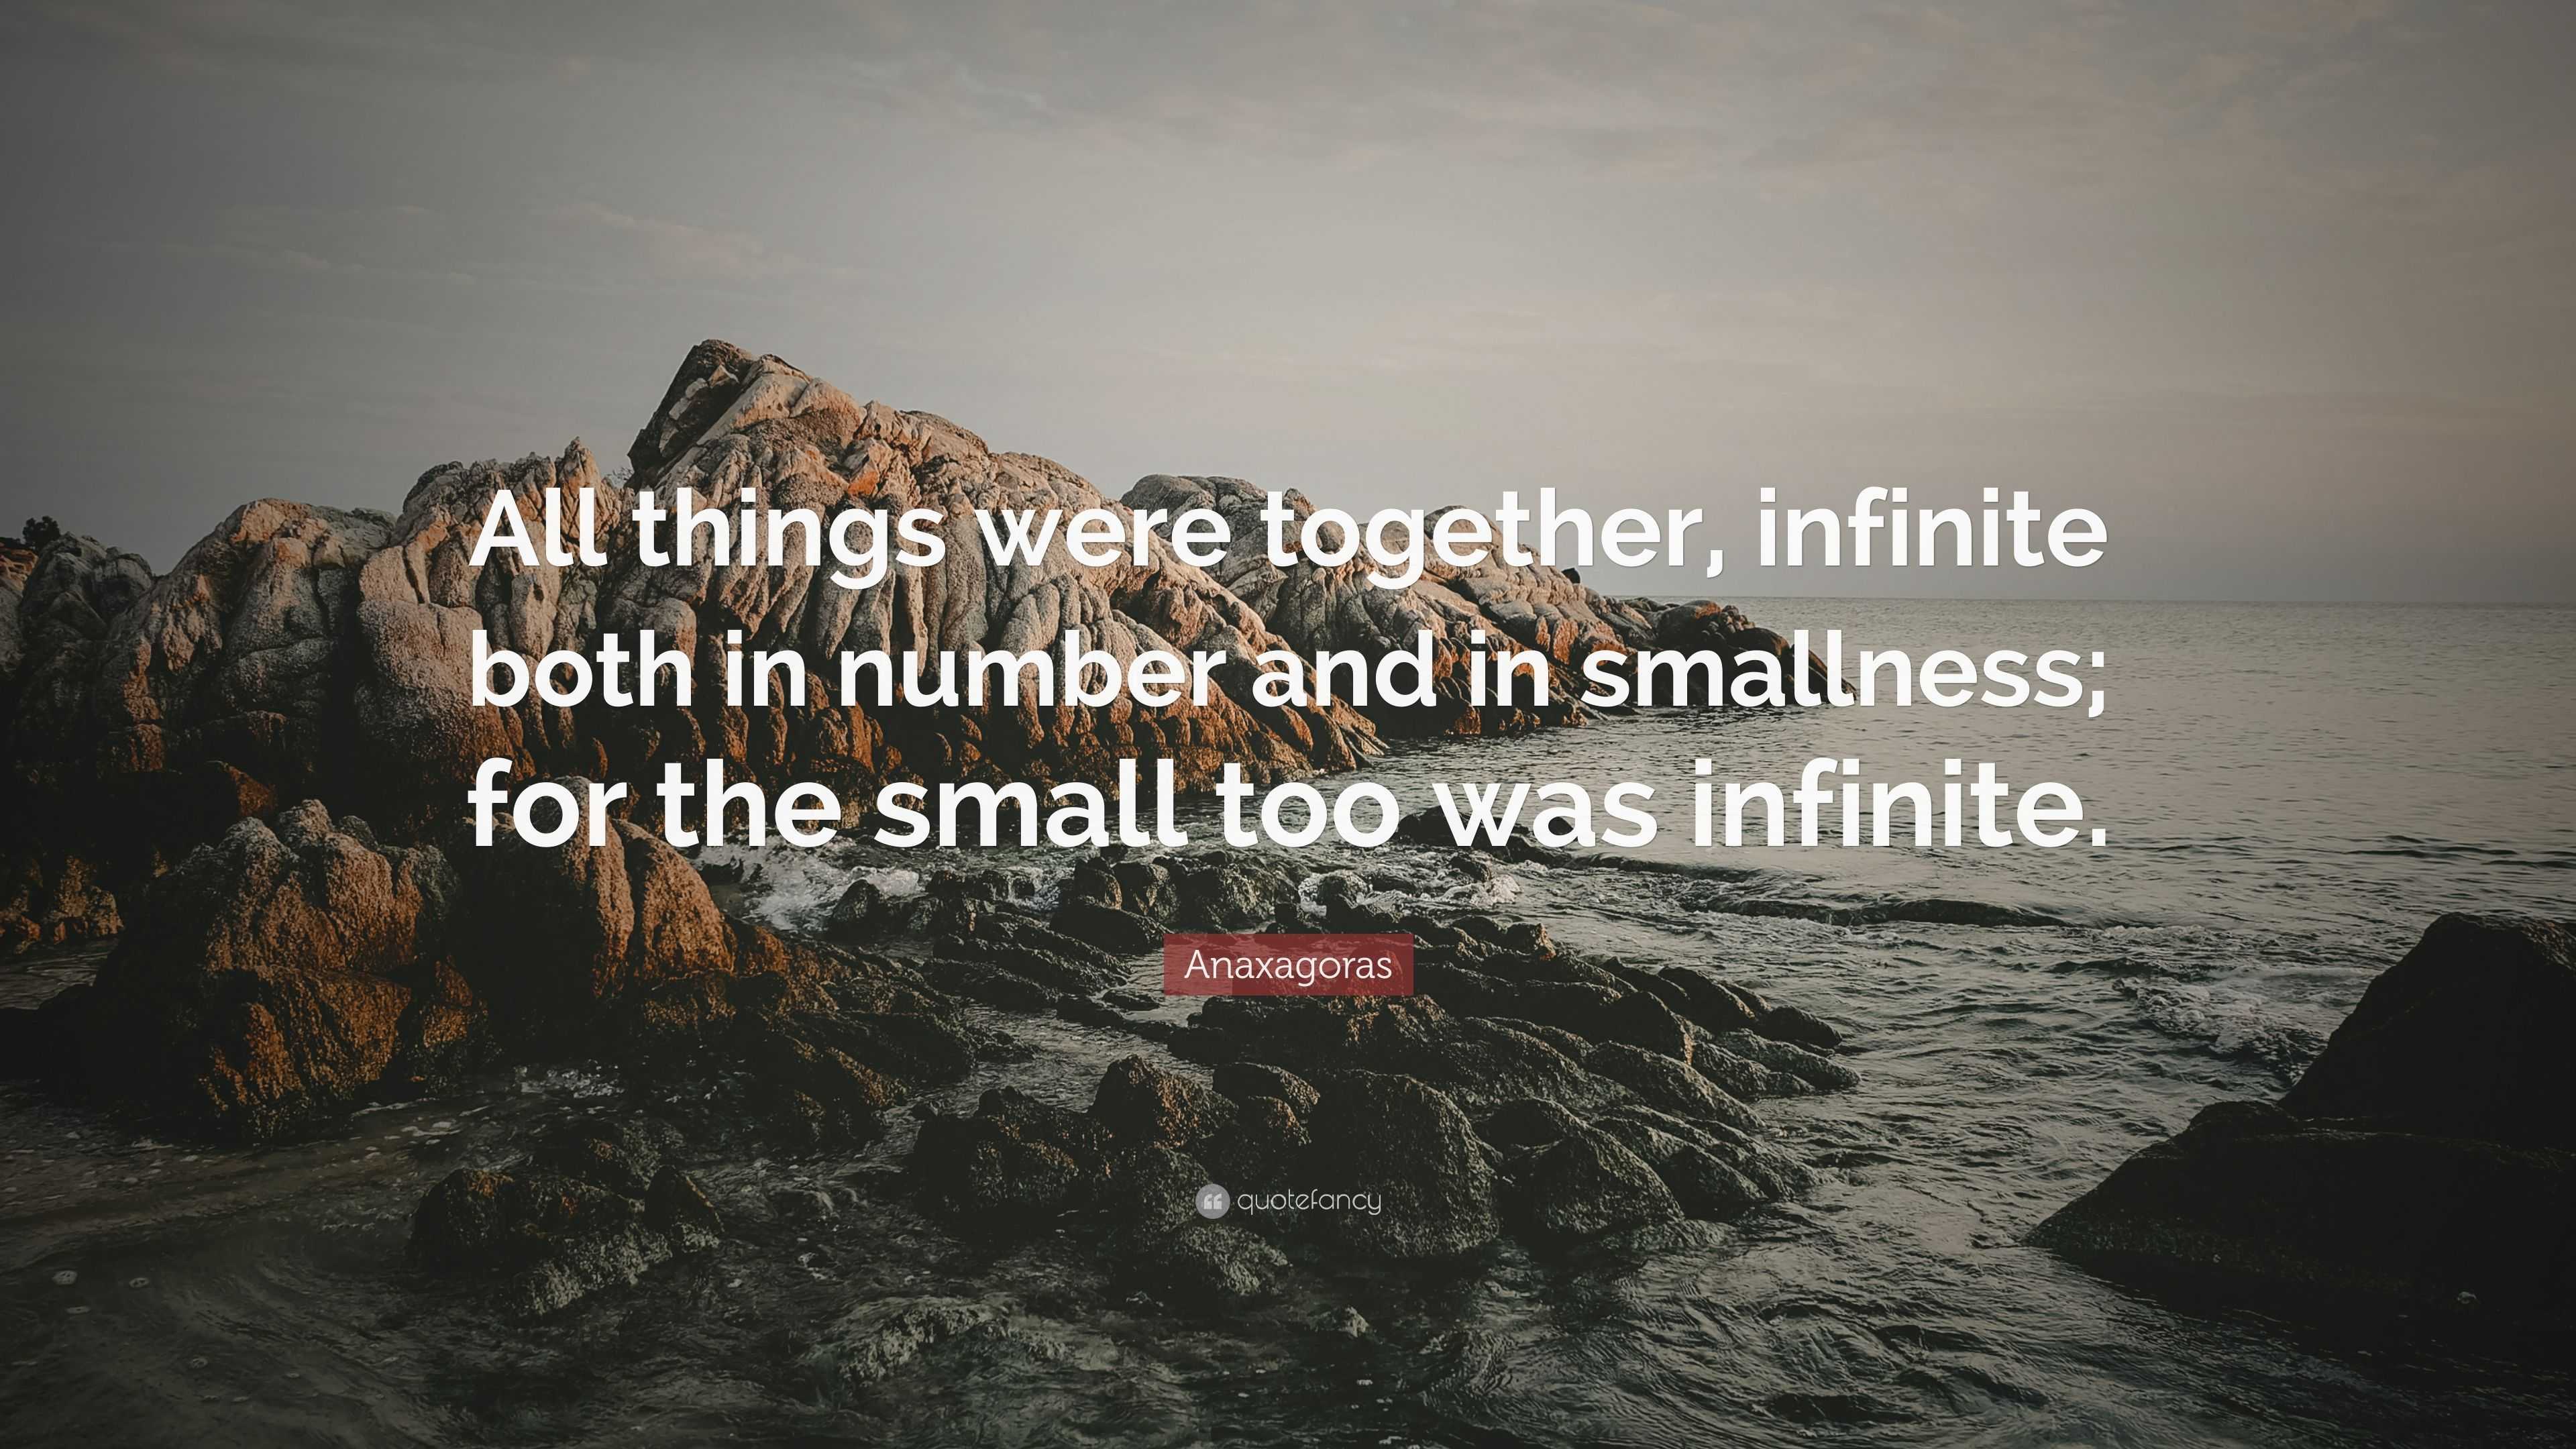 Anaxagoras Quote: “All things were together, infinite both in number and in  smallness; for the small